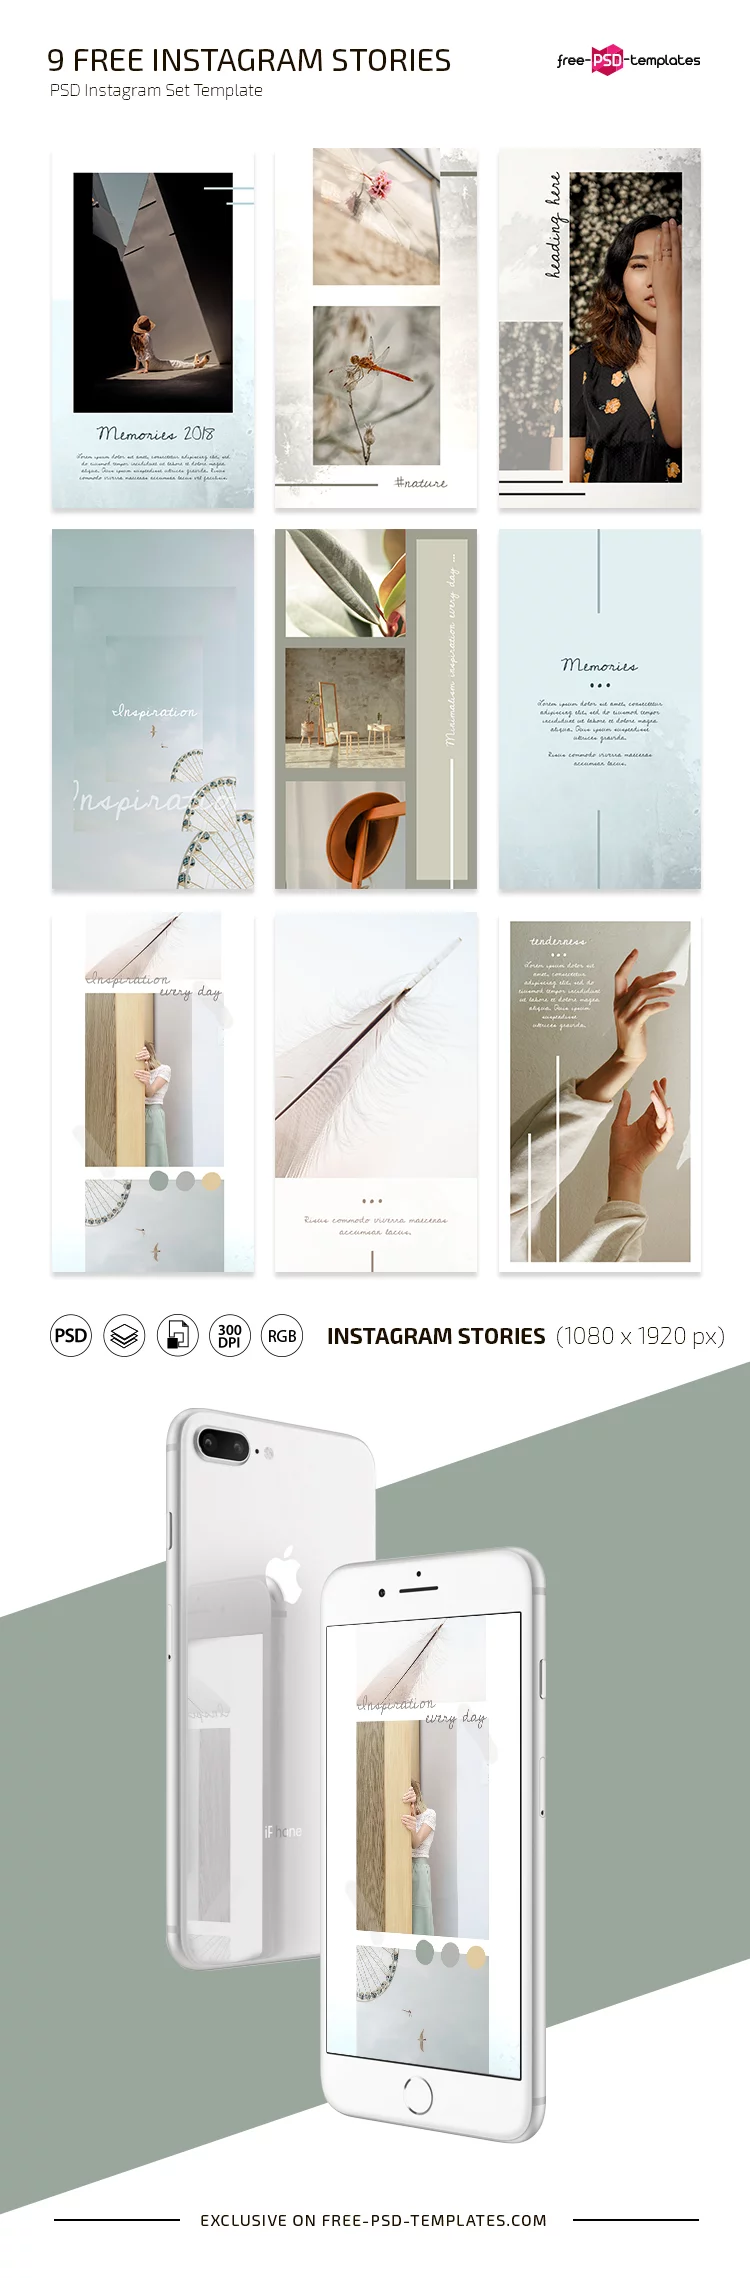 Free Instagram Stories Set Template in PSD